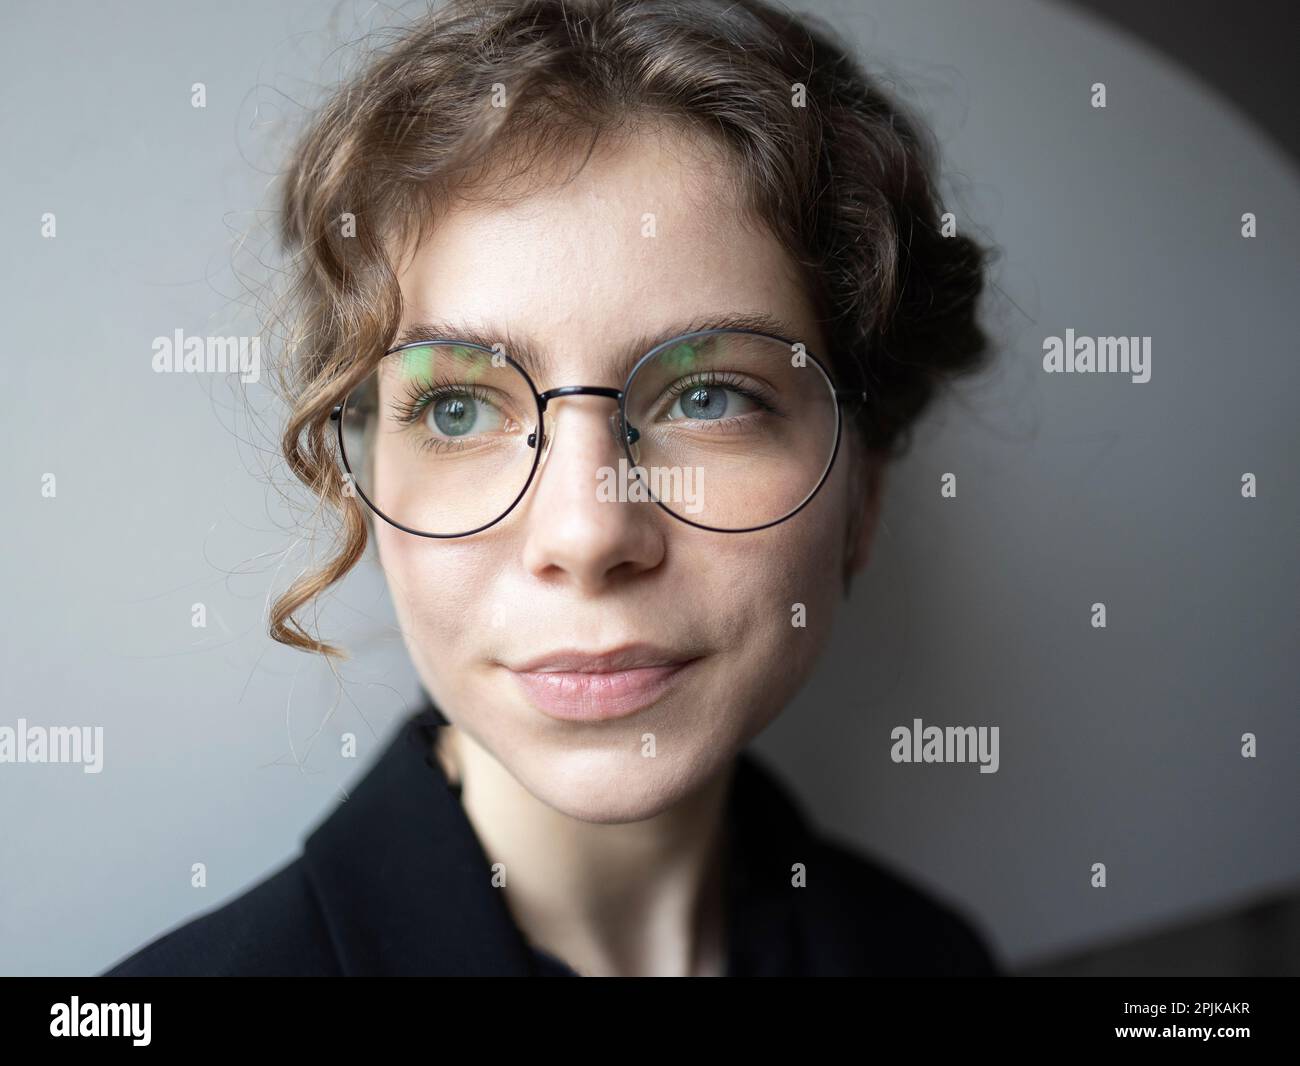 face portrait of a teenage girl 18 -19 years old, schoolgirl, college student. cute young smart woman in glasses, thinks, looks away. Real people, eve Stock Photo